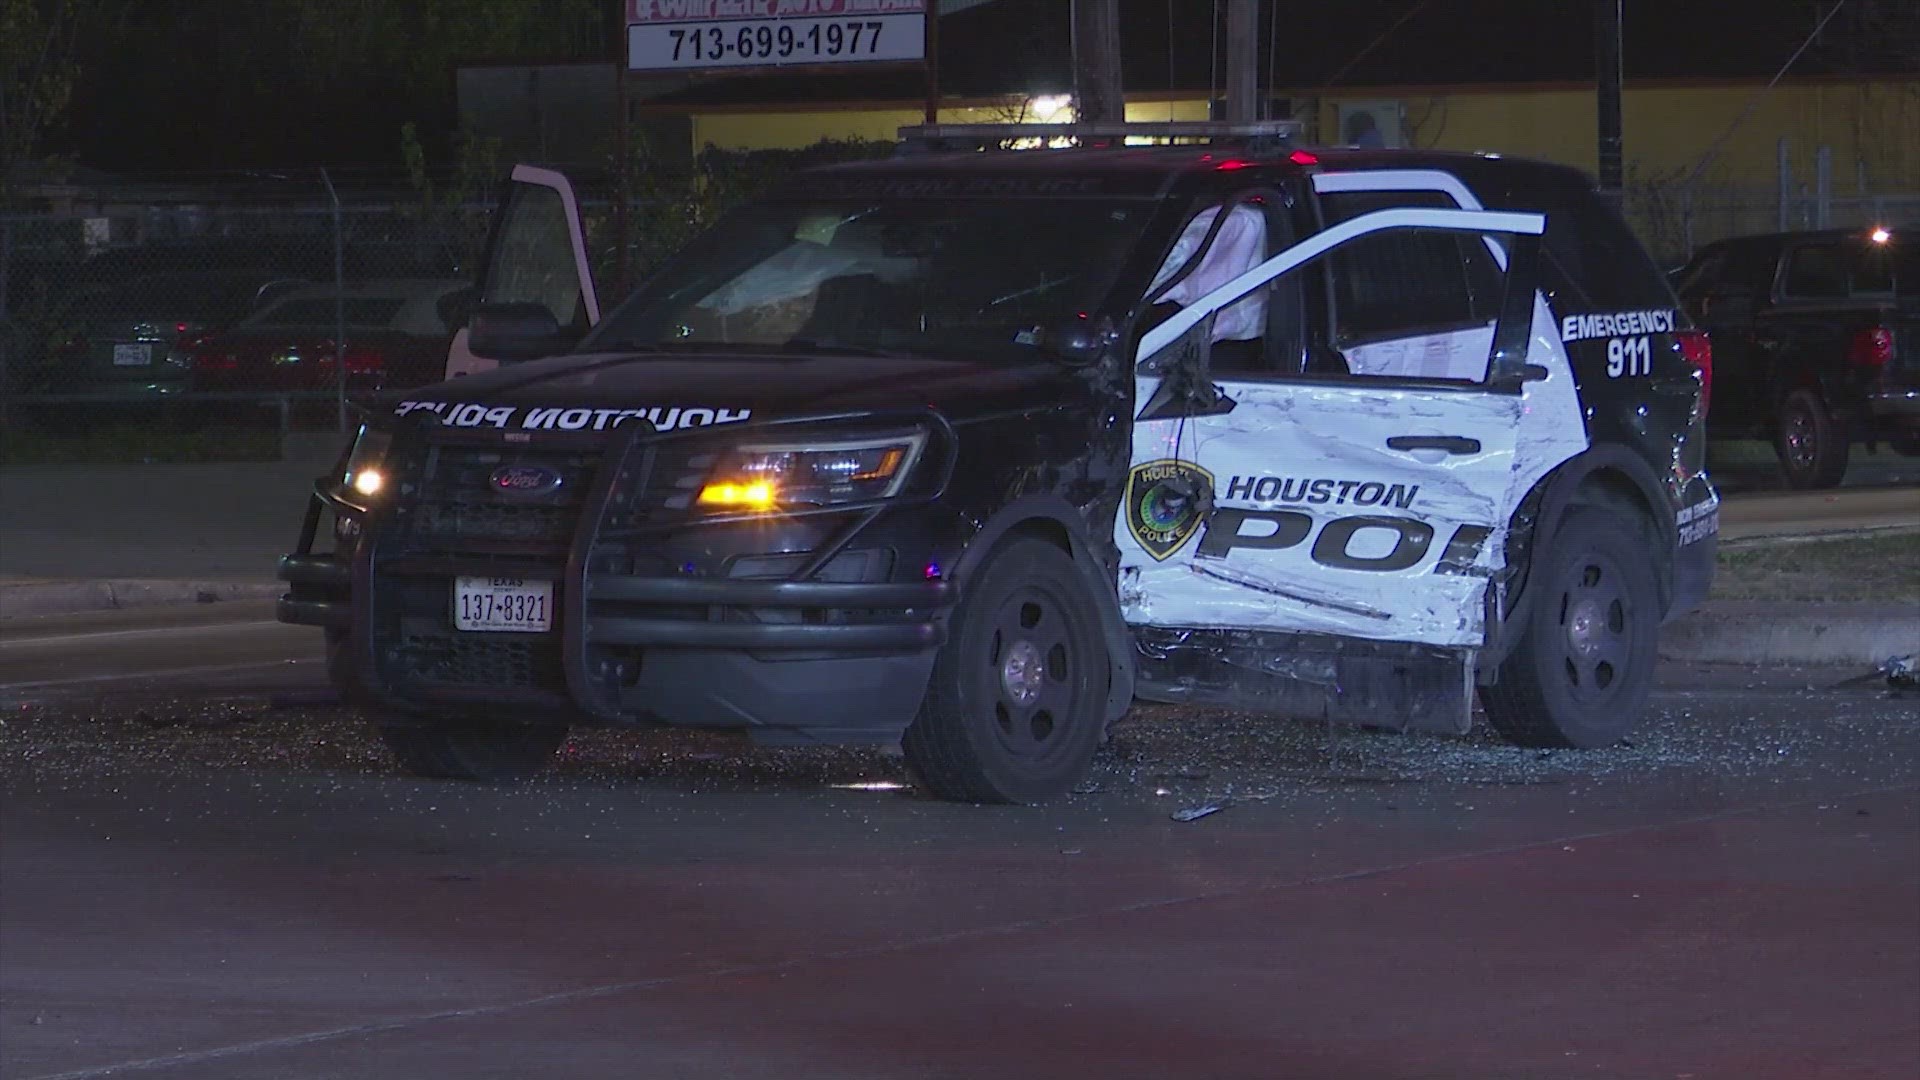 Houston police said at least one officer was injured Thursday night at the end of a chase.